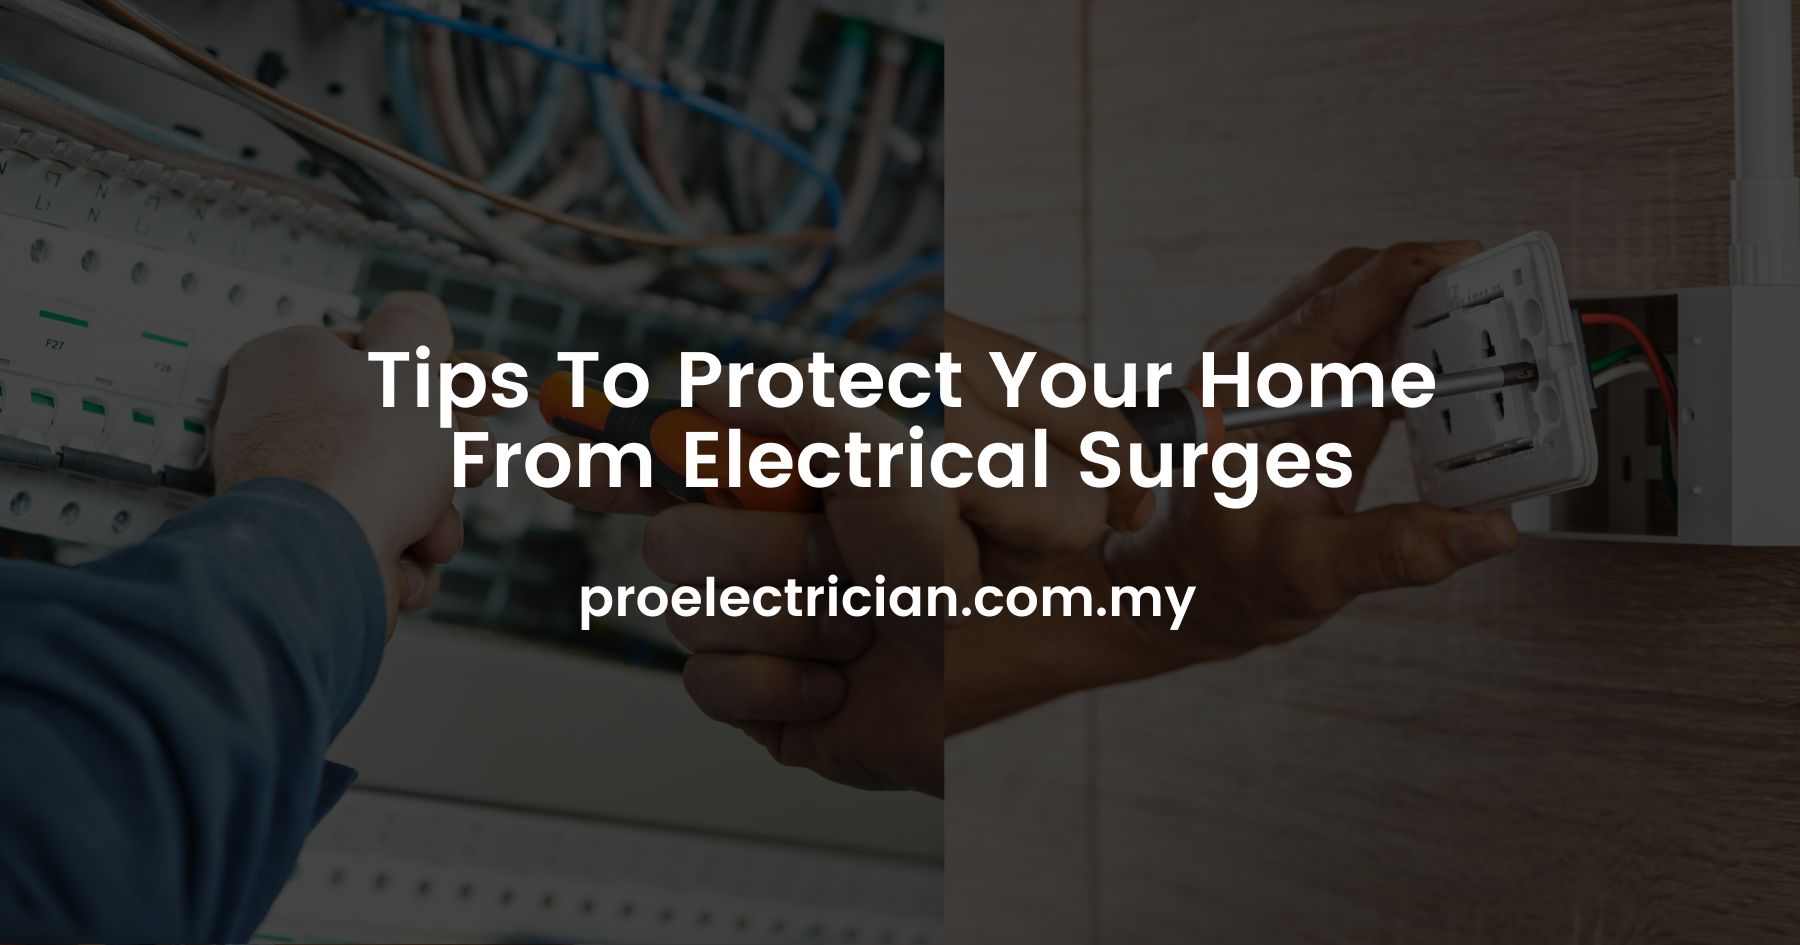 Tips To Protect Your Home From Electrical Surges